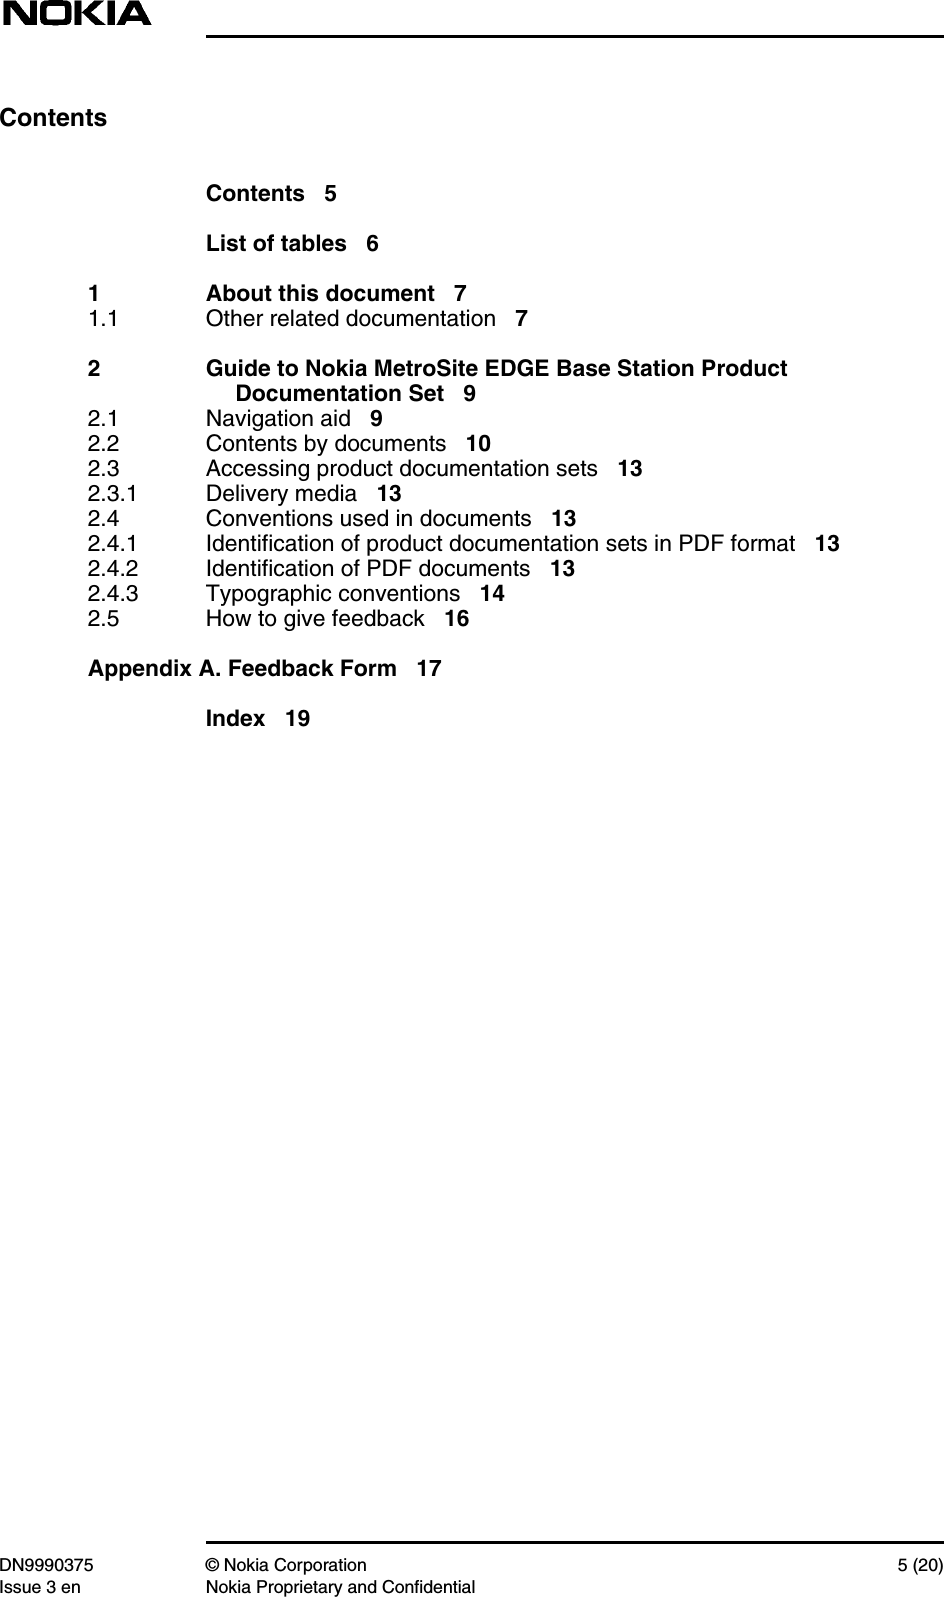 DN9990375 © Nokia Corporation 5 (20)Issue 3 en Nokia Proprietary and ConfidentialContentsContents 5List of tables 61 About this document 71.1 Other related documentation 72 Guide to Nokia MetroSite EDGE Base Station ProductDocumentation Set 92.1 Navigation aid 92.2 Contents by documents 102.3 Accessing product documentation sets 132.3.1 Delivery media 132.4 Conventions used in documents 132.4.1 Identification of product documentation sets in PDF format 132.4.2 Identification of PDF documents 132.4.3 Typographic conventions 142.5 How to give feedback 16Appendix A. Feedback Form 17Index 19